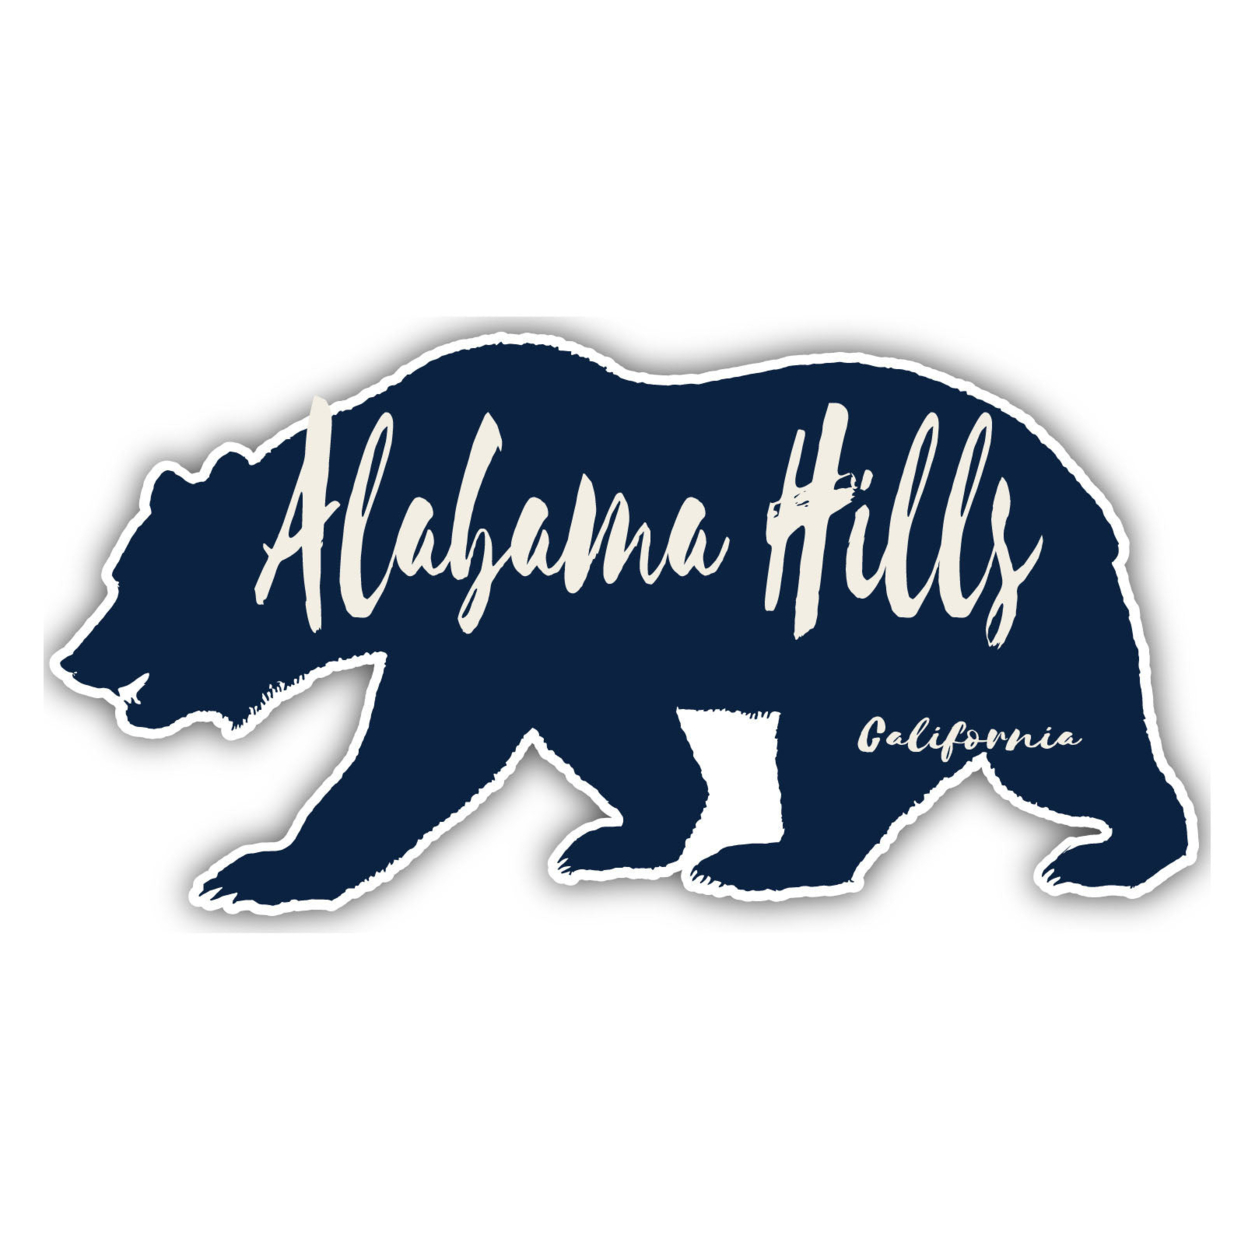 Alabama Hills California Souvenir Decorative Stickers (Choose Theme And Size) - 4-Pack, 8-Inch, Great Outdoors